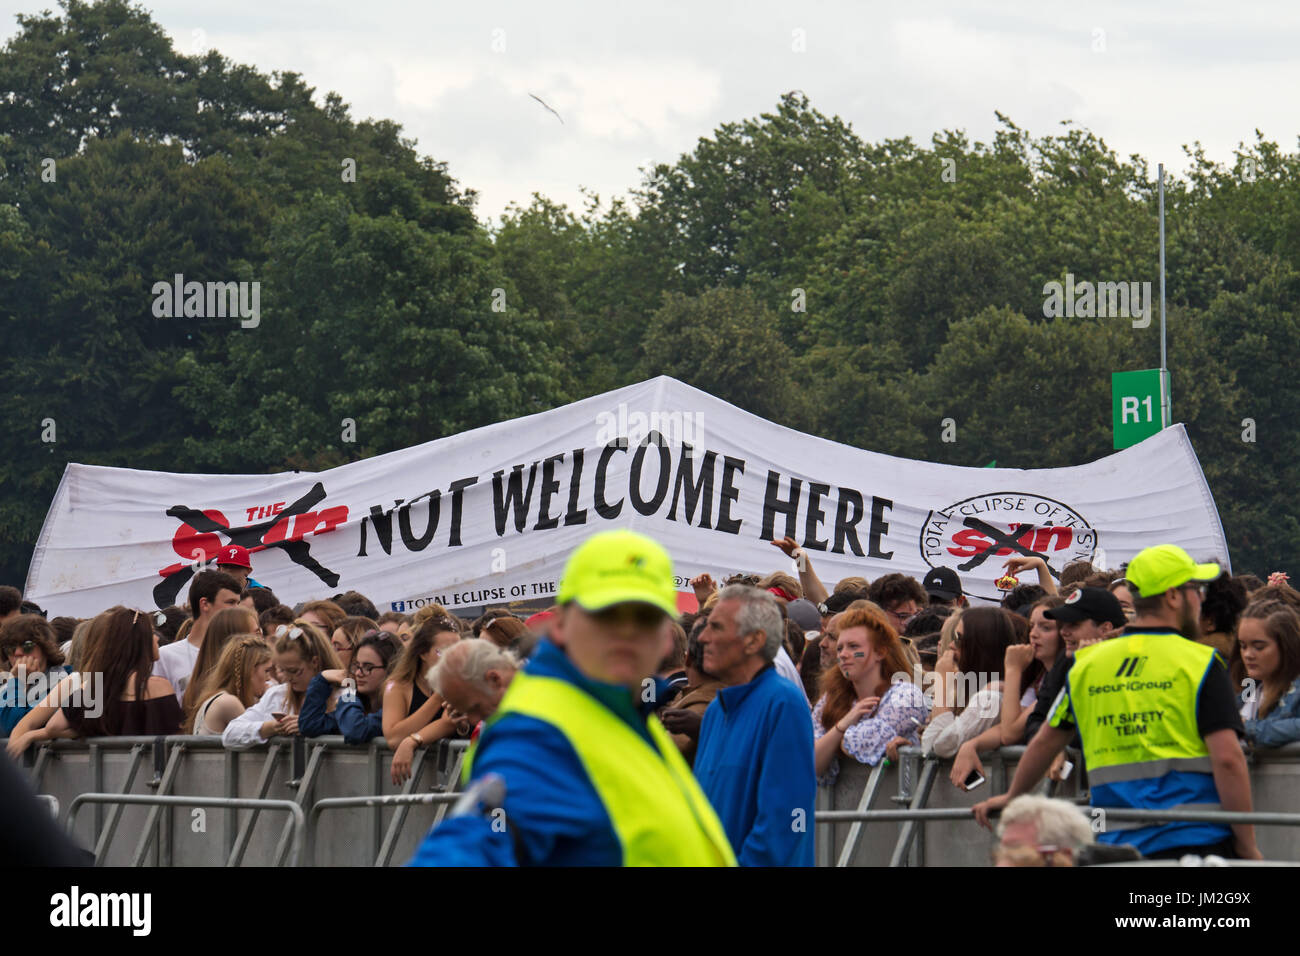 The Sun not welcome here banner on show at the Liverpool International Music Festival in Sefton Park Stock Photo